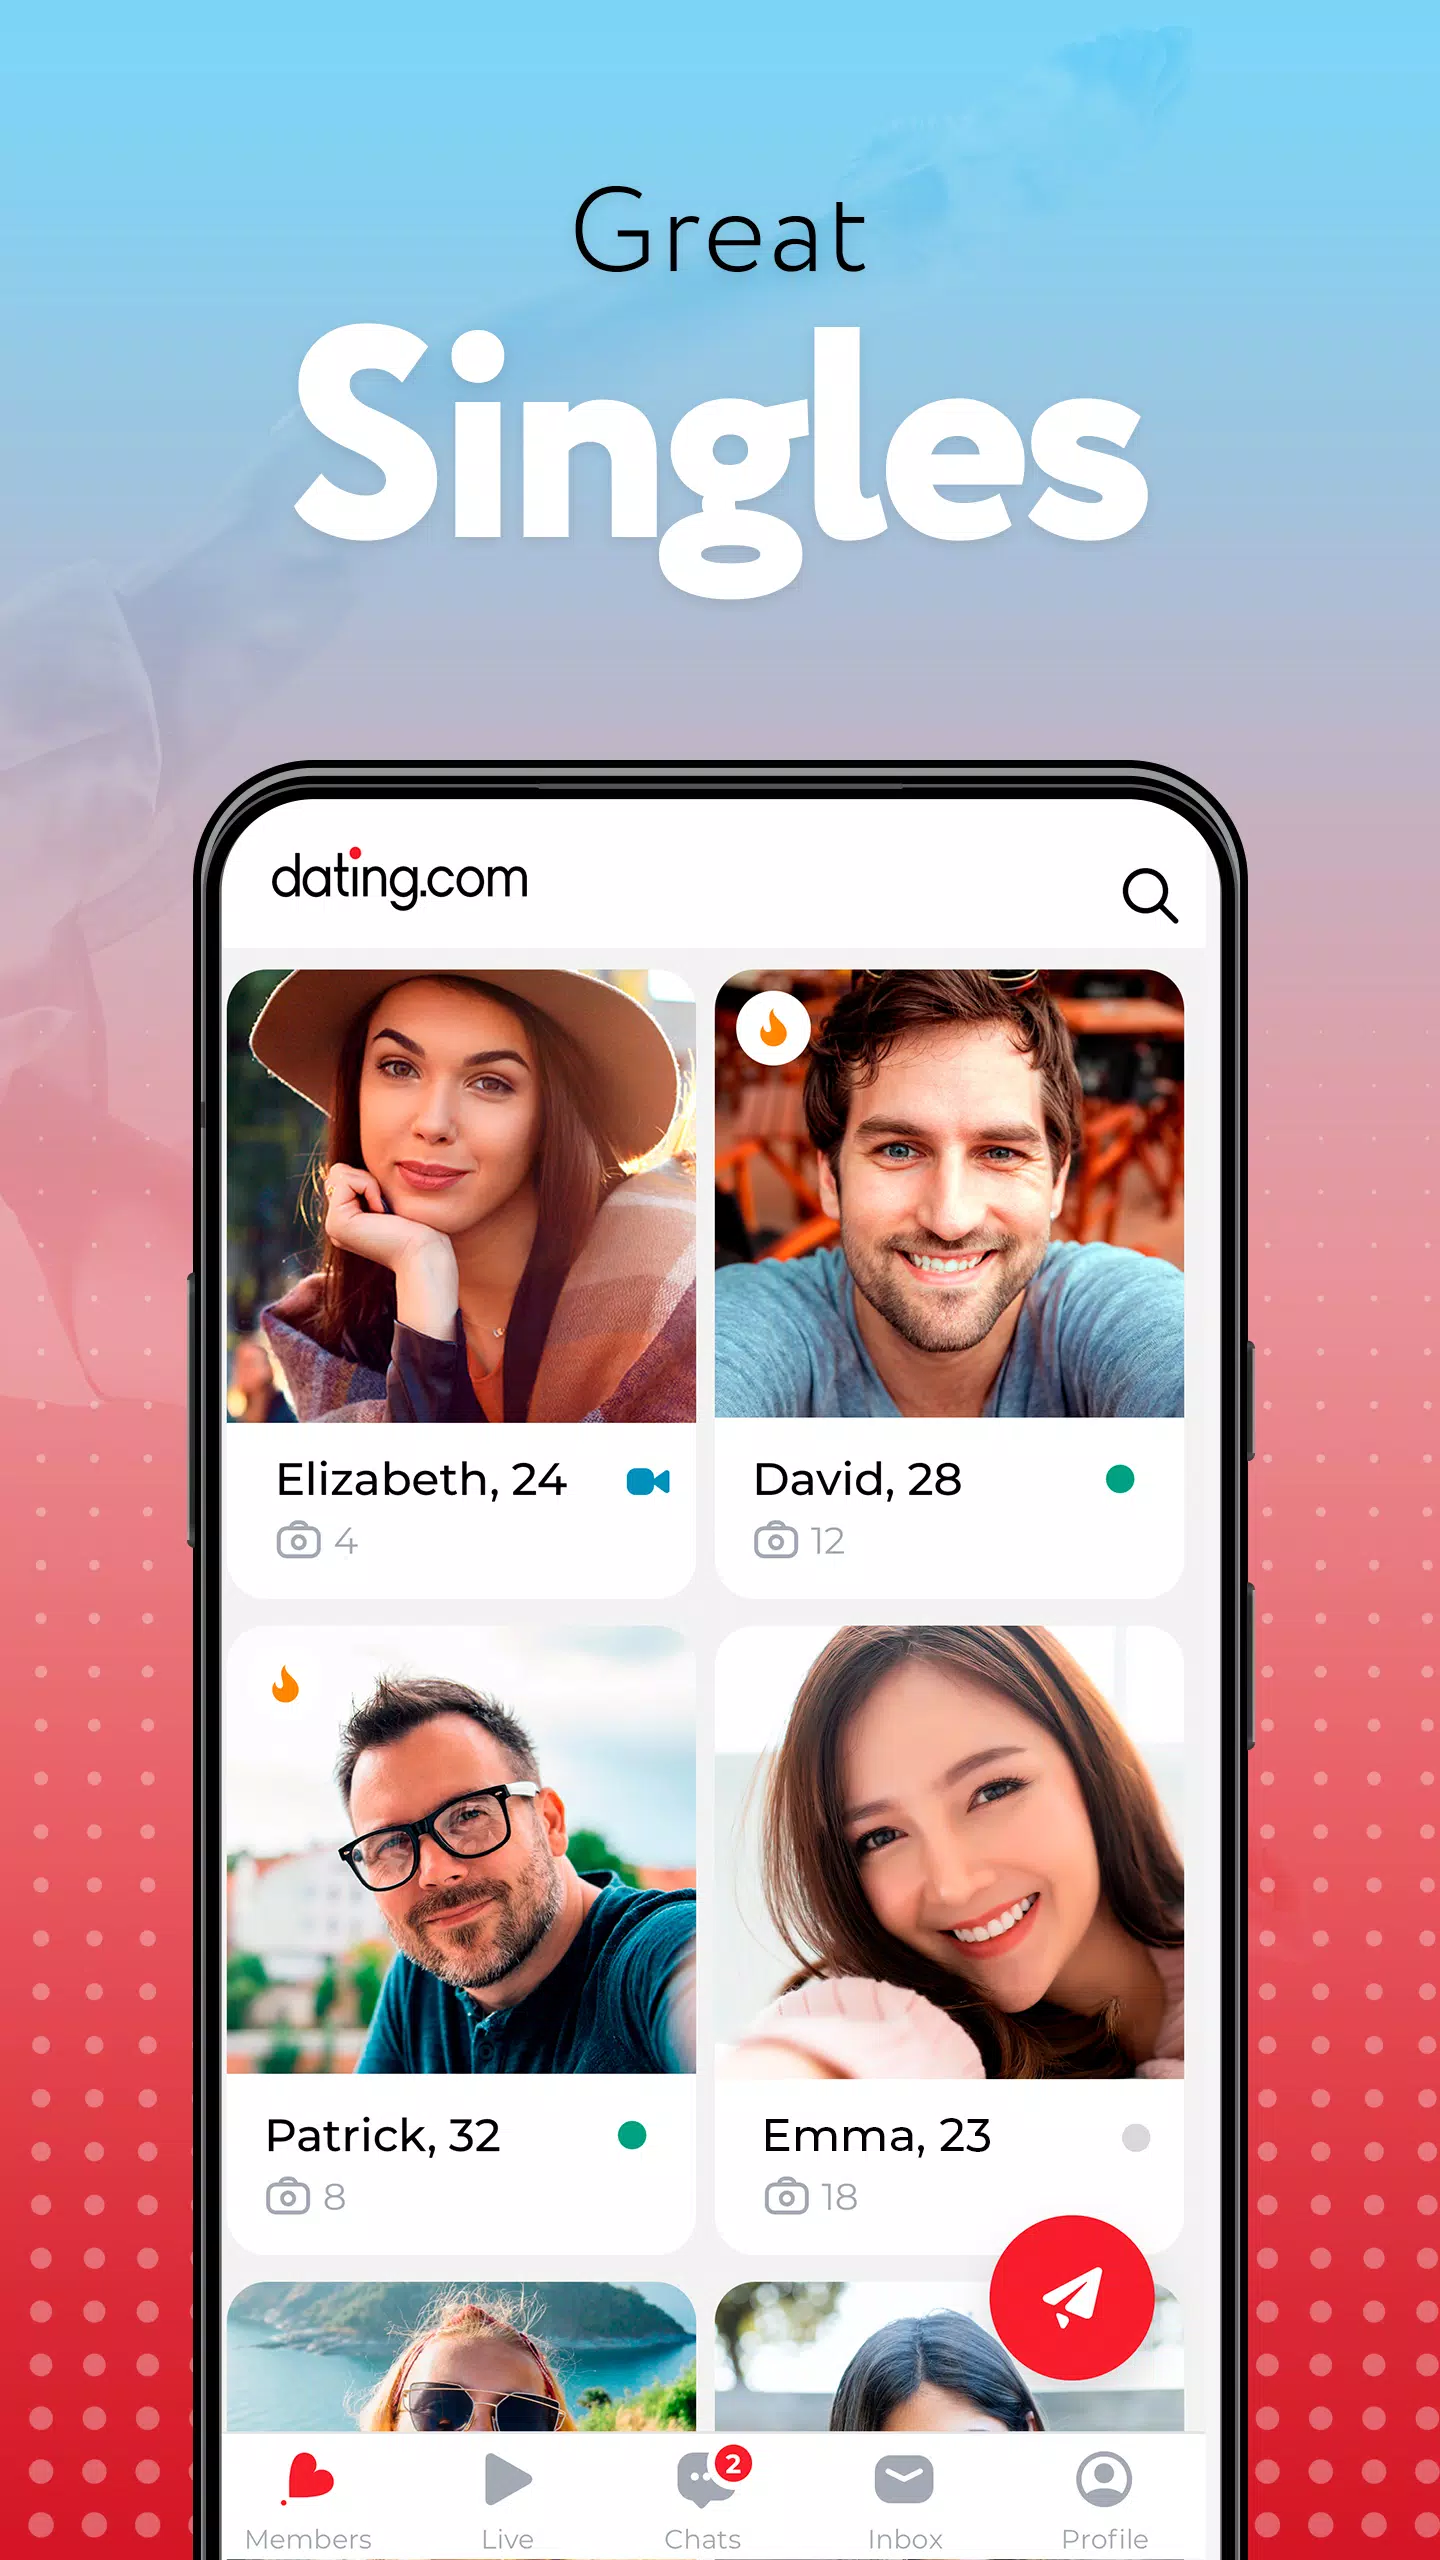 Video dating